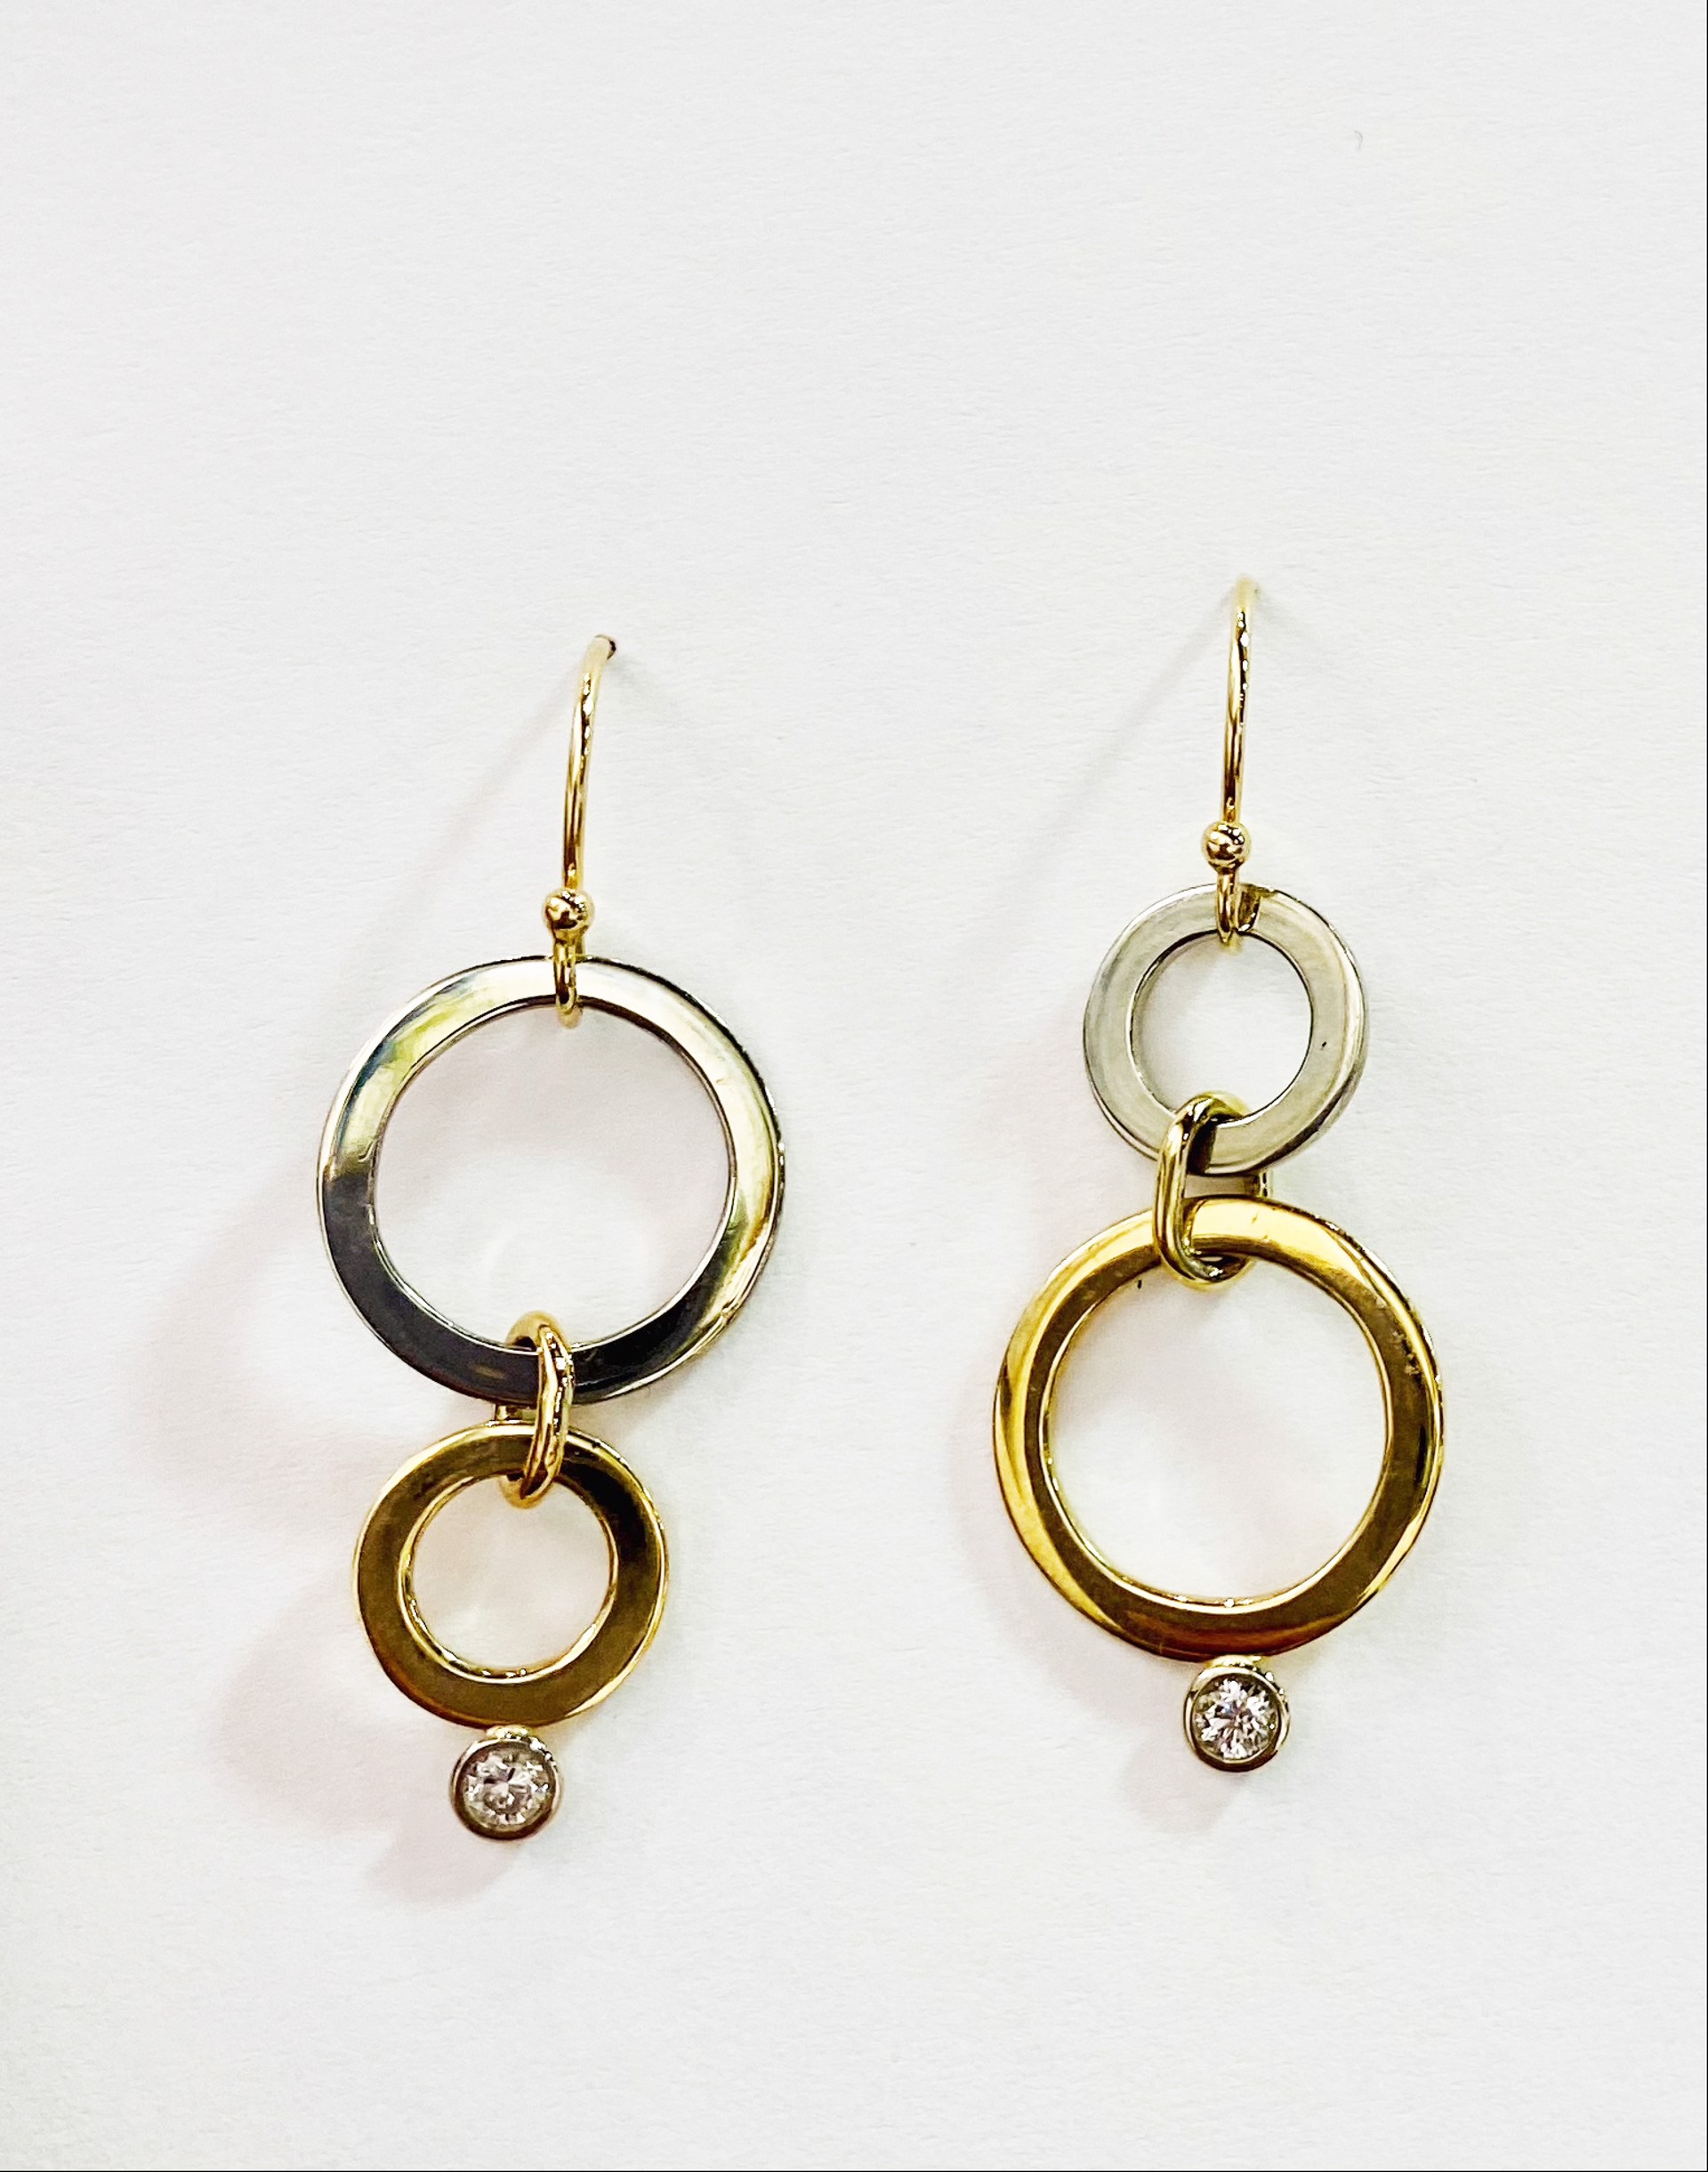 Circle Earrings by D'ETTE DELFORGE